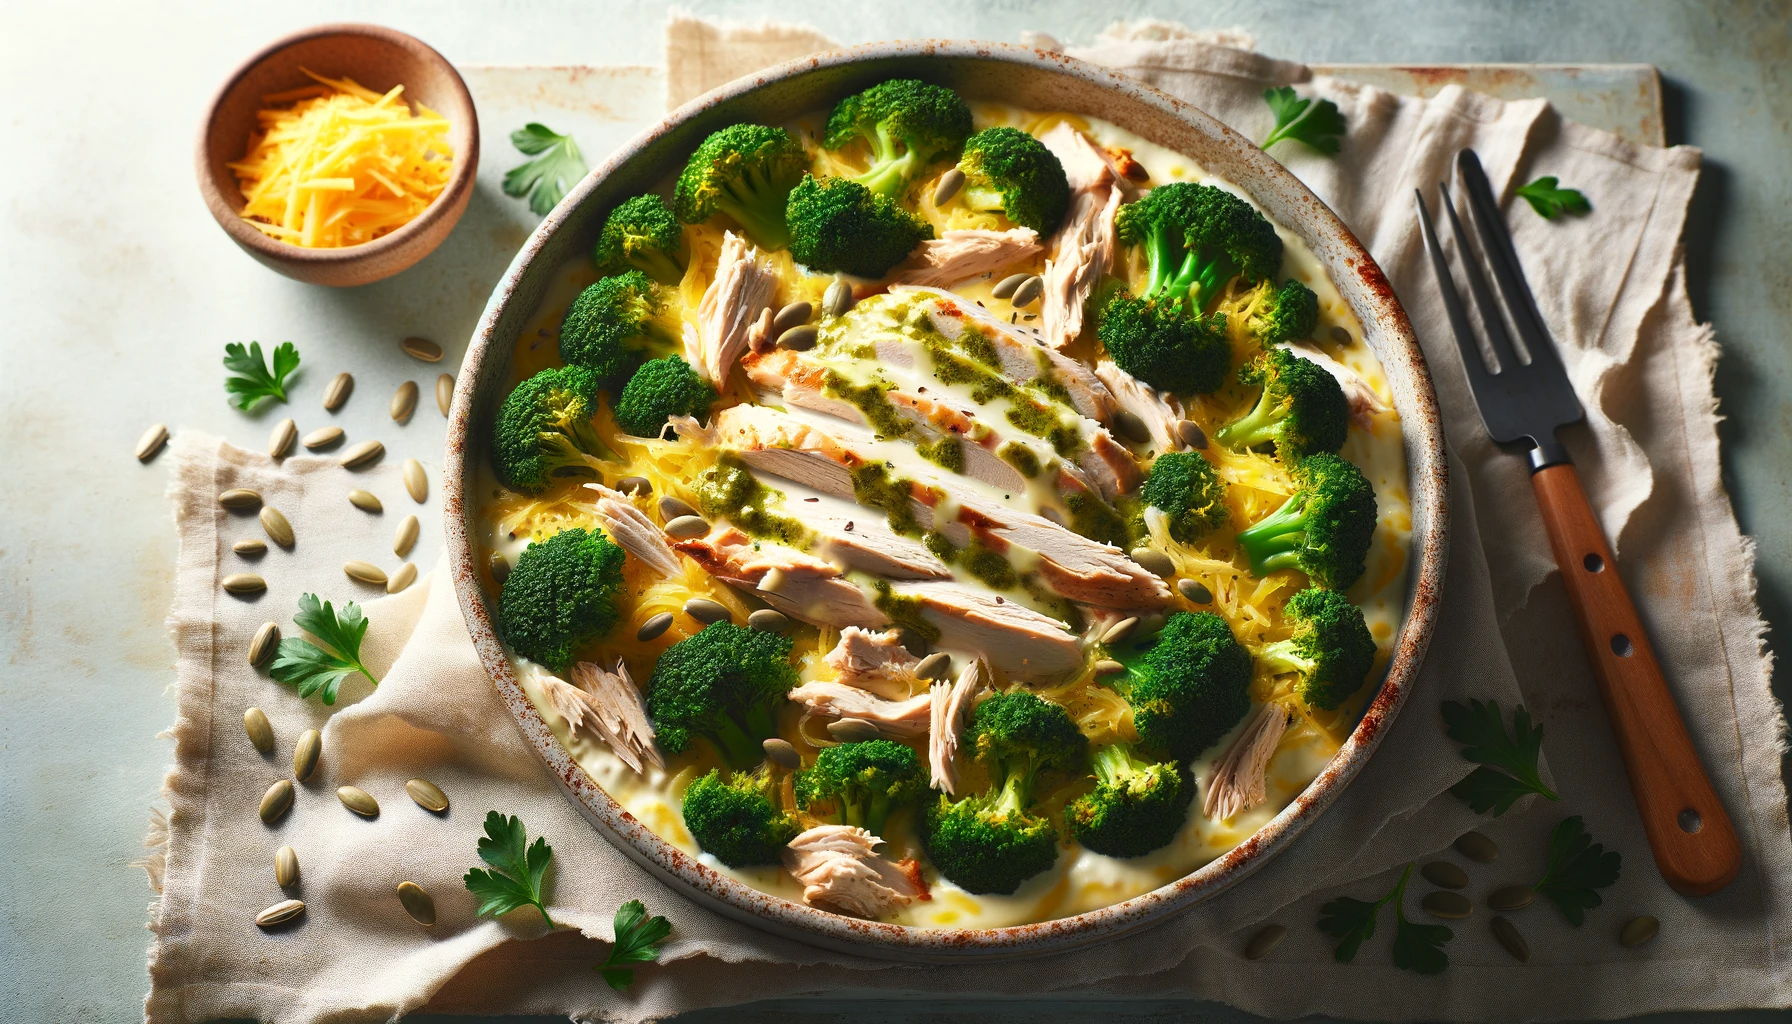 Baked Broccoli and Chicken